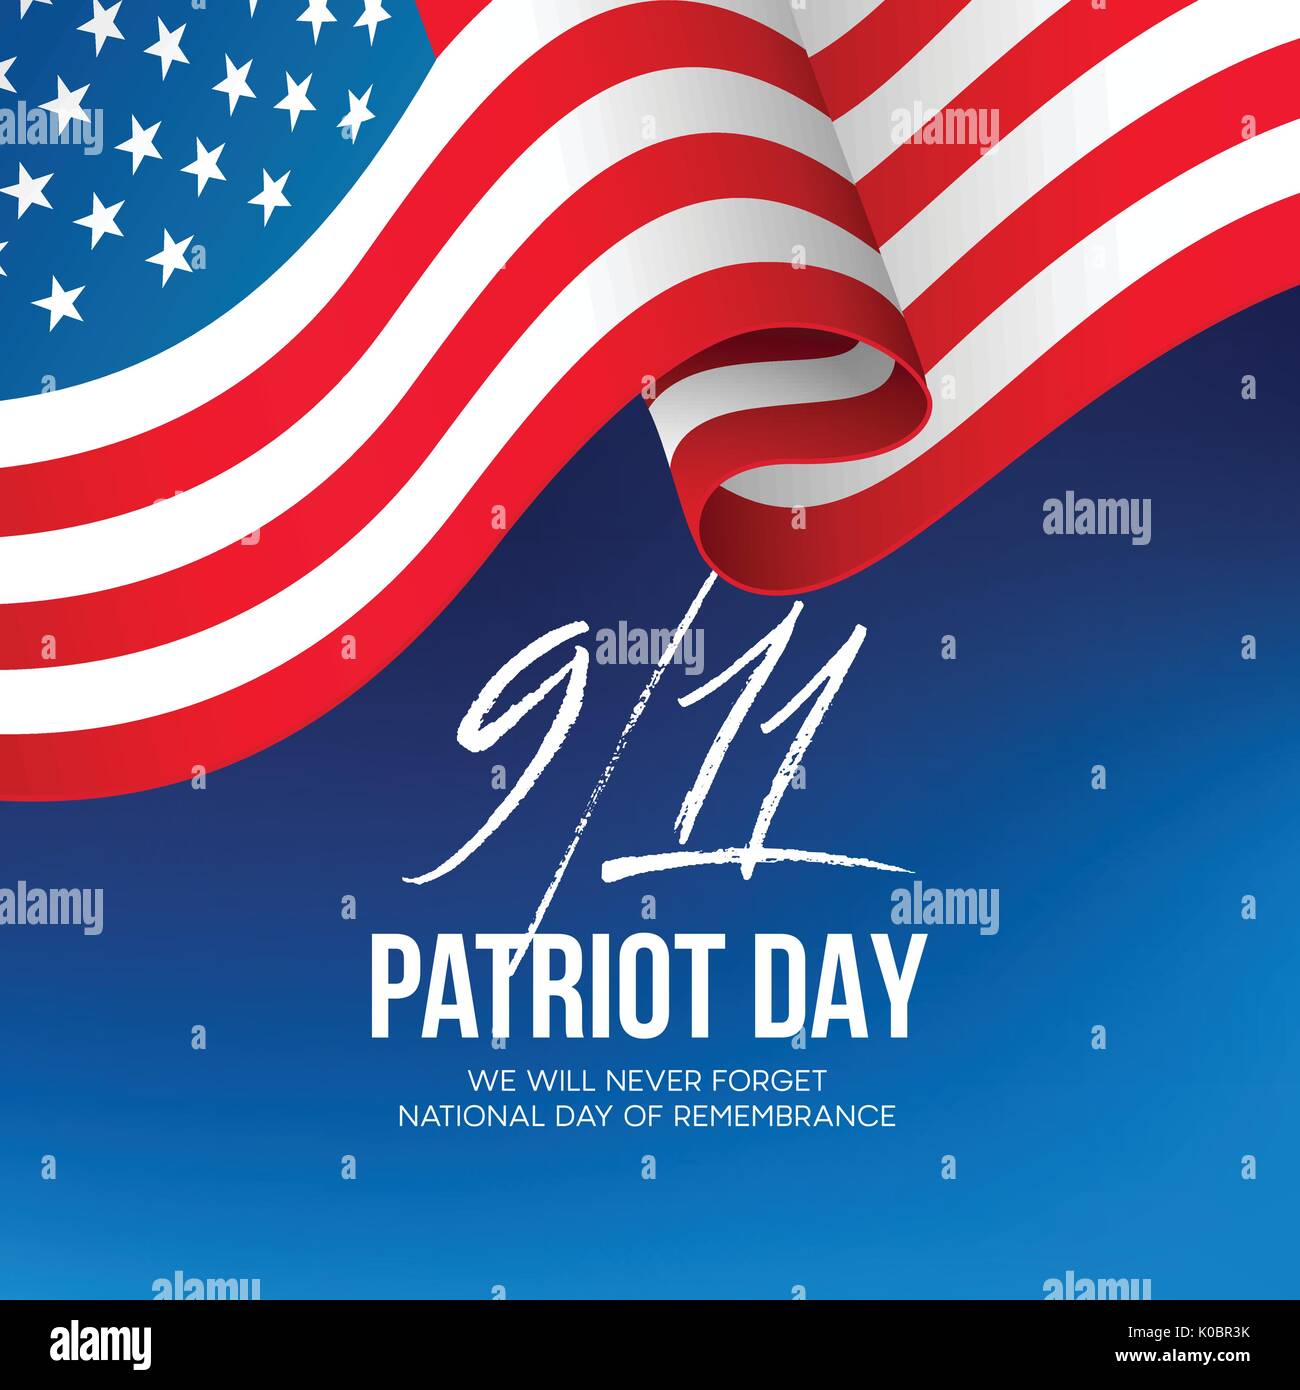 September 11, 2001 Patriot Day background. We Will Never Forget. background. Vector illustration Stock Vector